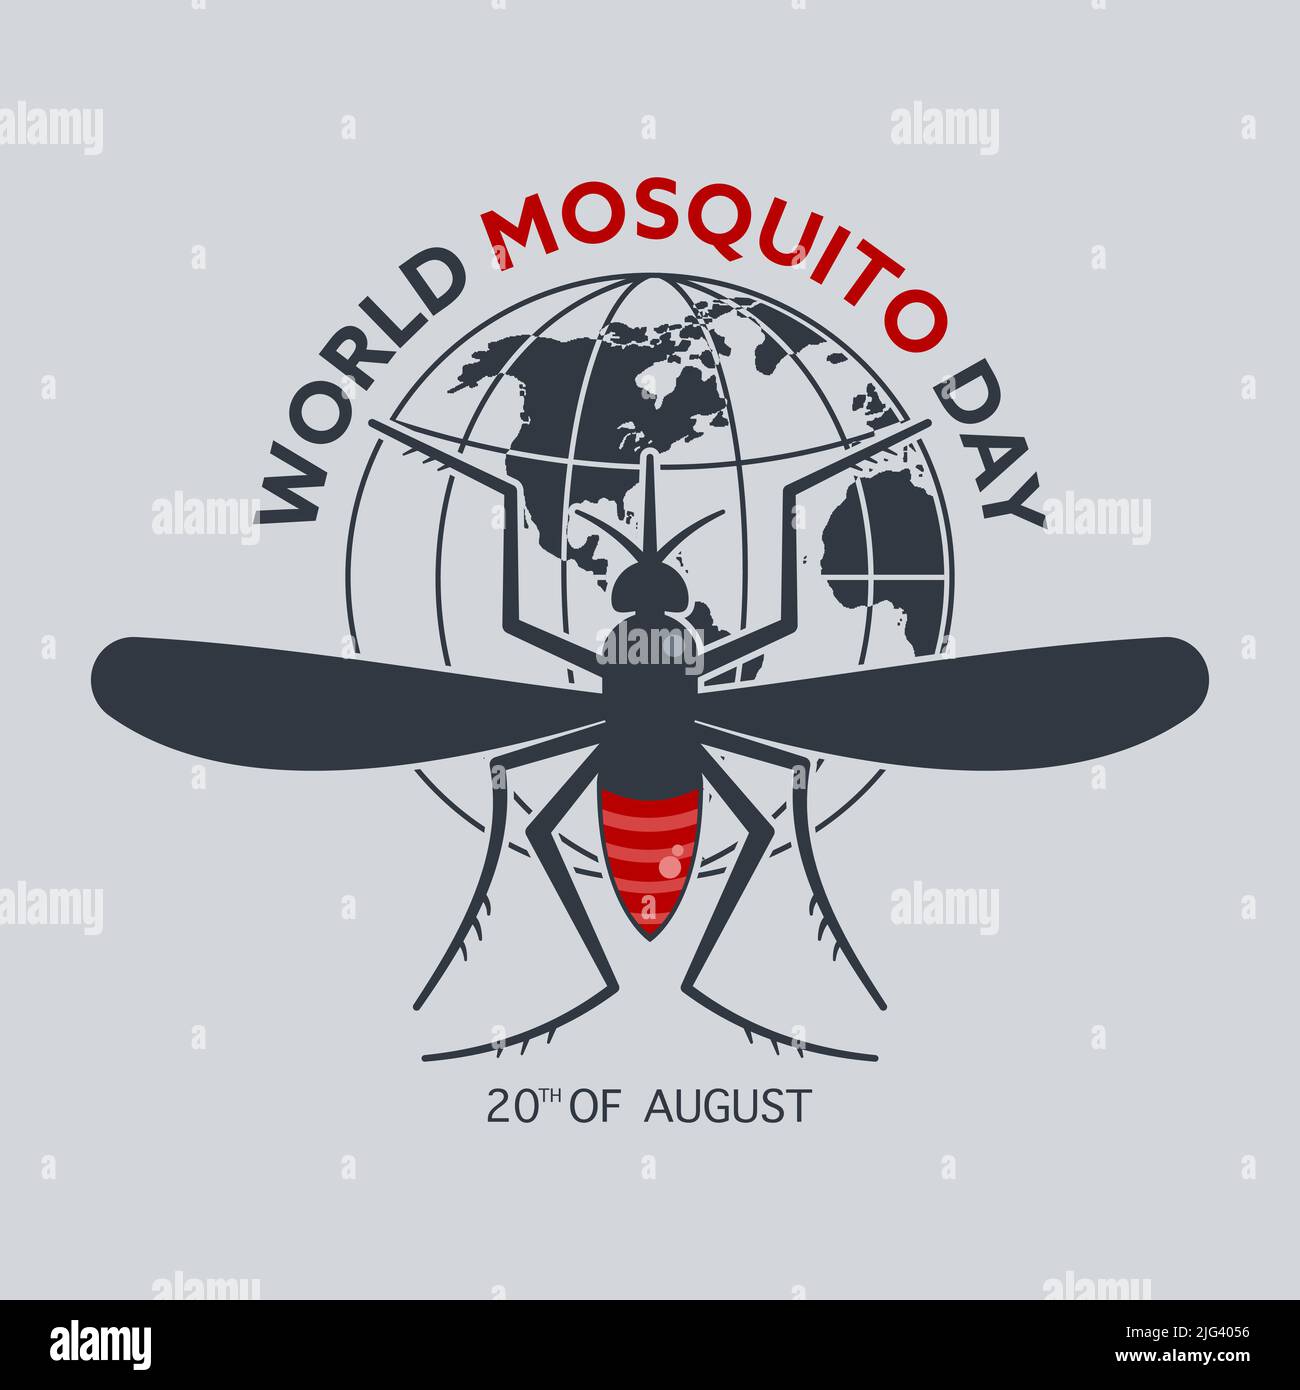 World Mosquito Day 20th of August. A mosquito sits on the Globe. Malaria awareness concept. Flat style illustration. Stock Vector